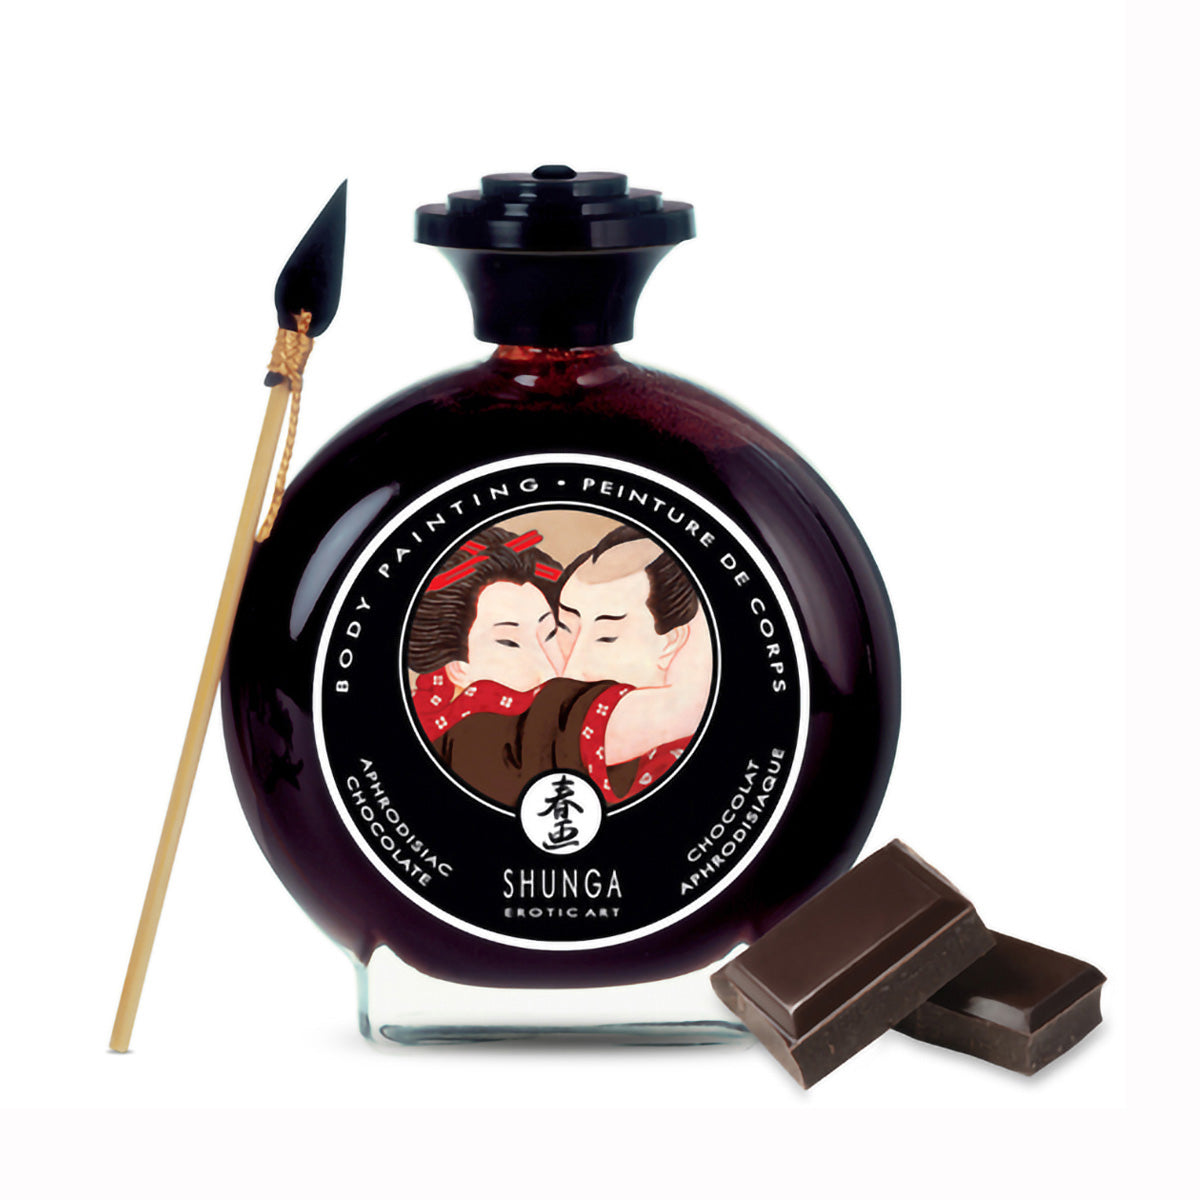 Shunga Edible Body Paint Painting with Brush Chocolate Flavored